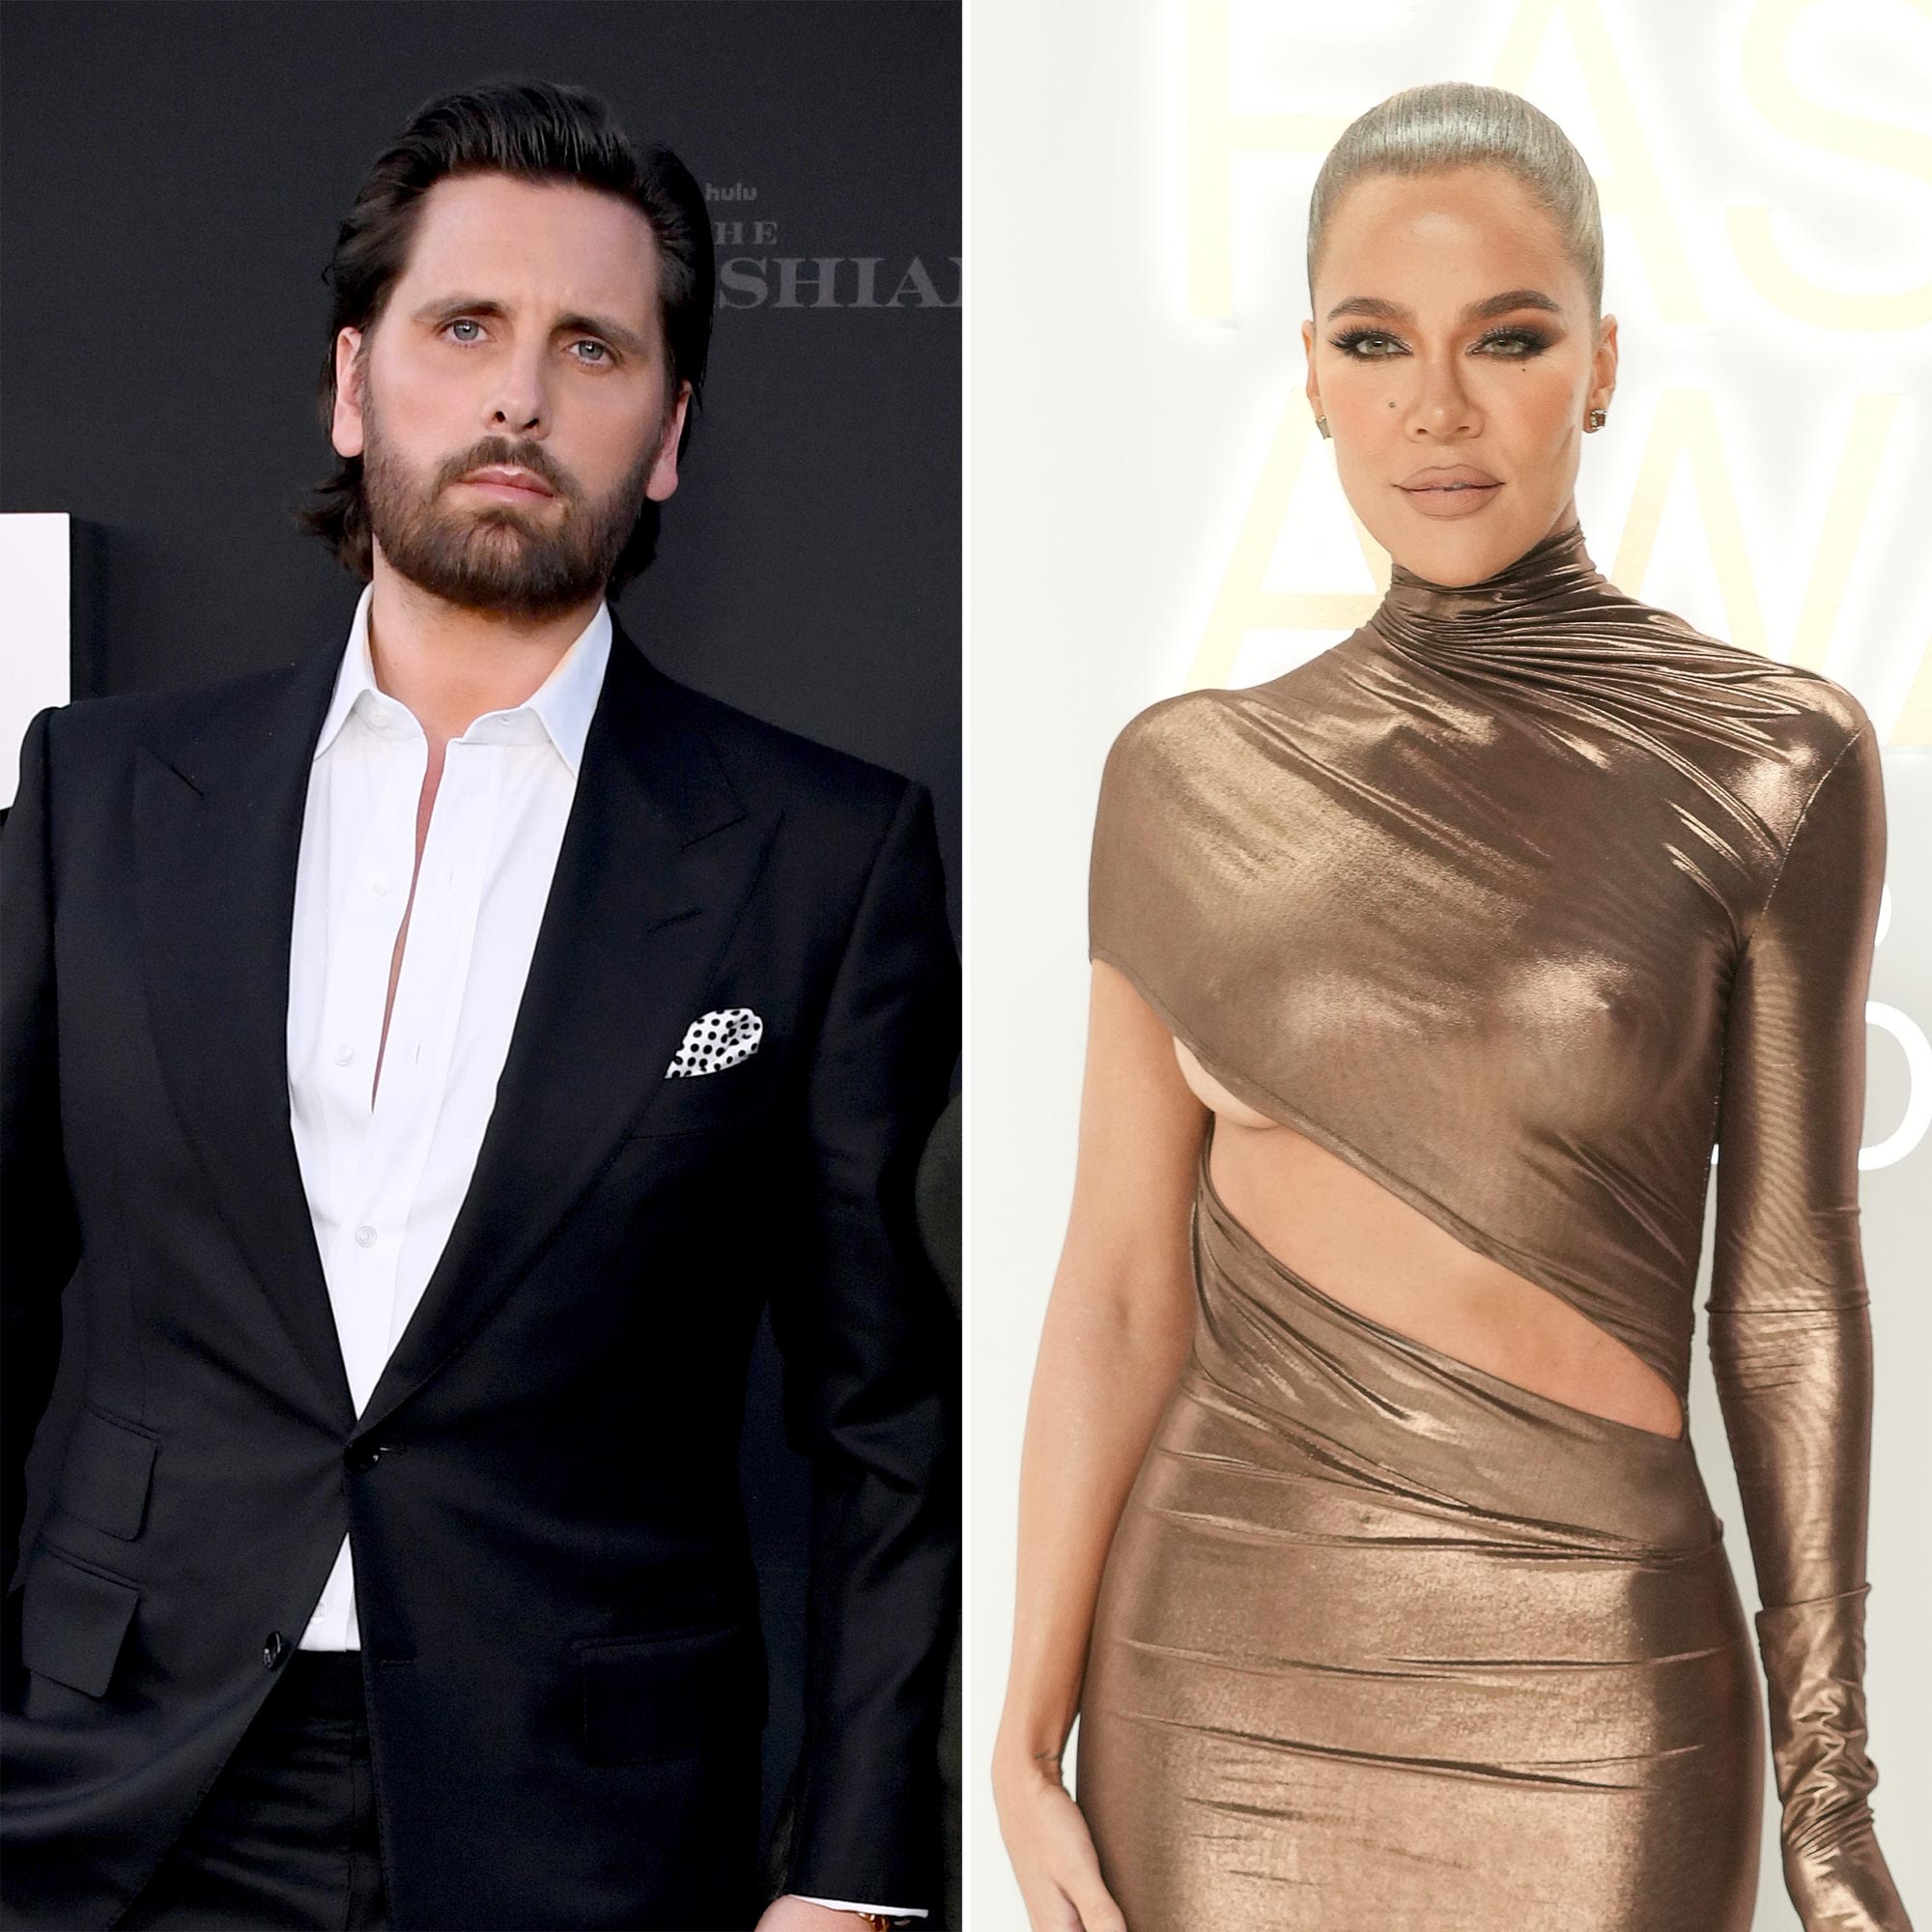 Scott Disick Reveals Why He Thought He and Khloe Kardashian Would Be ‘Celibate for Life’